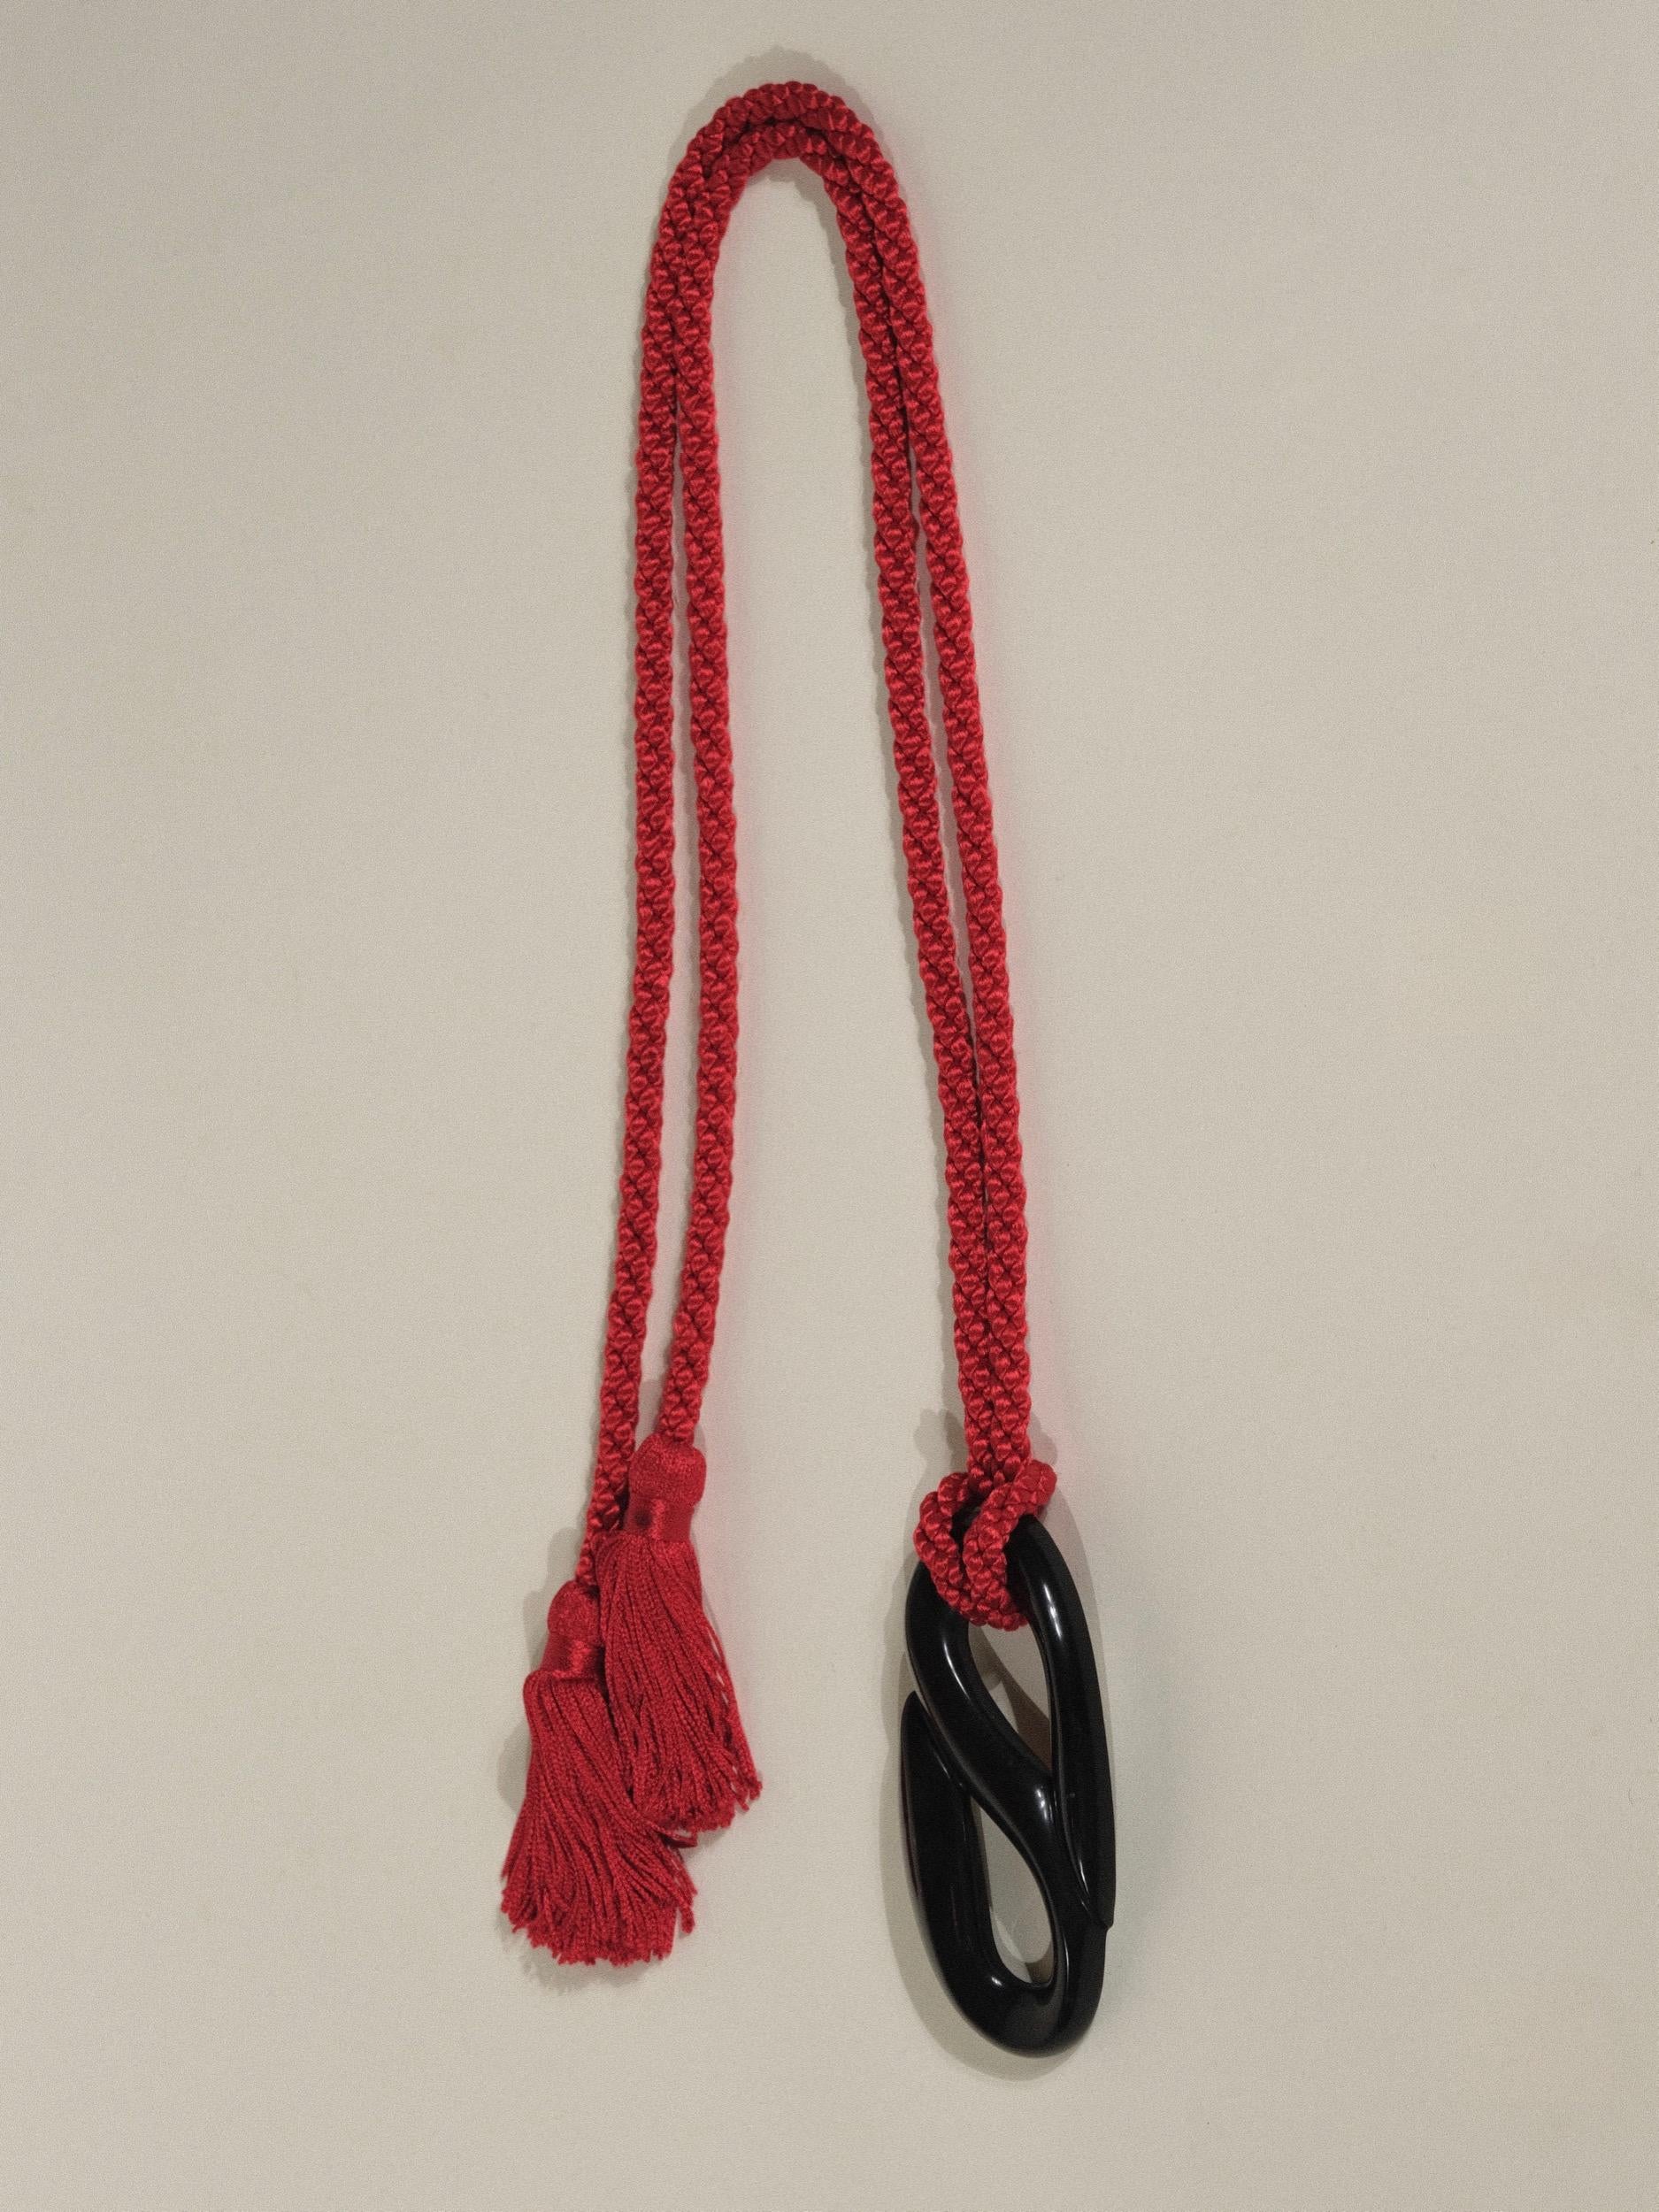 Tassel Rope Belt by Patricia von Musulin
Sculptural Lucite with Red Woven Tassel
Signed 